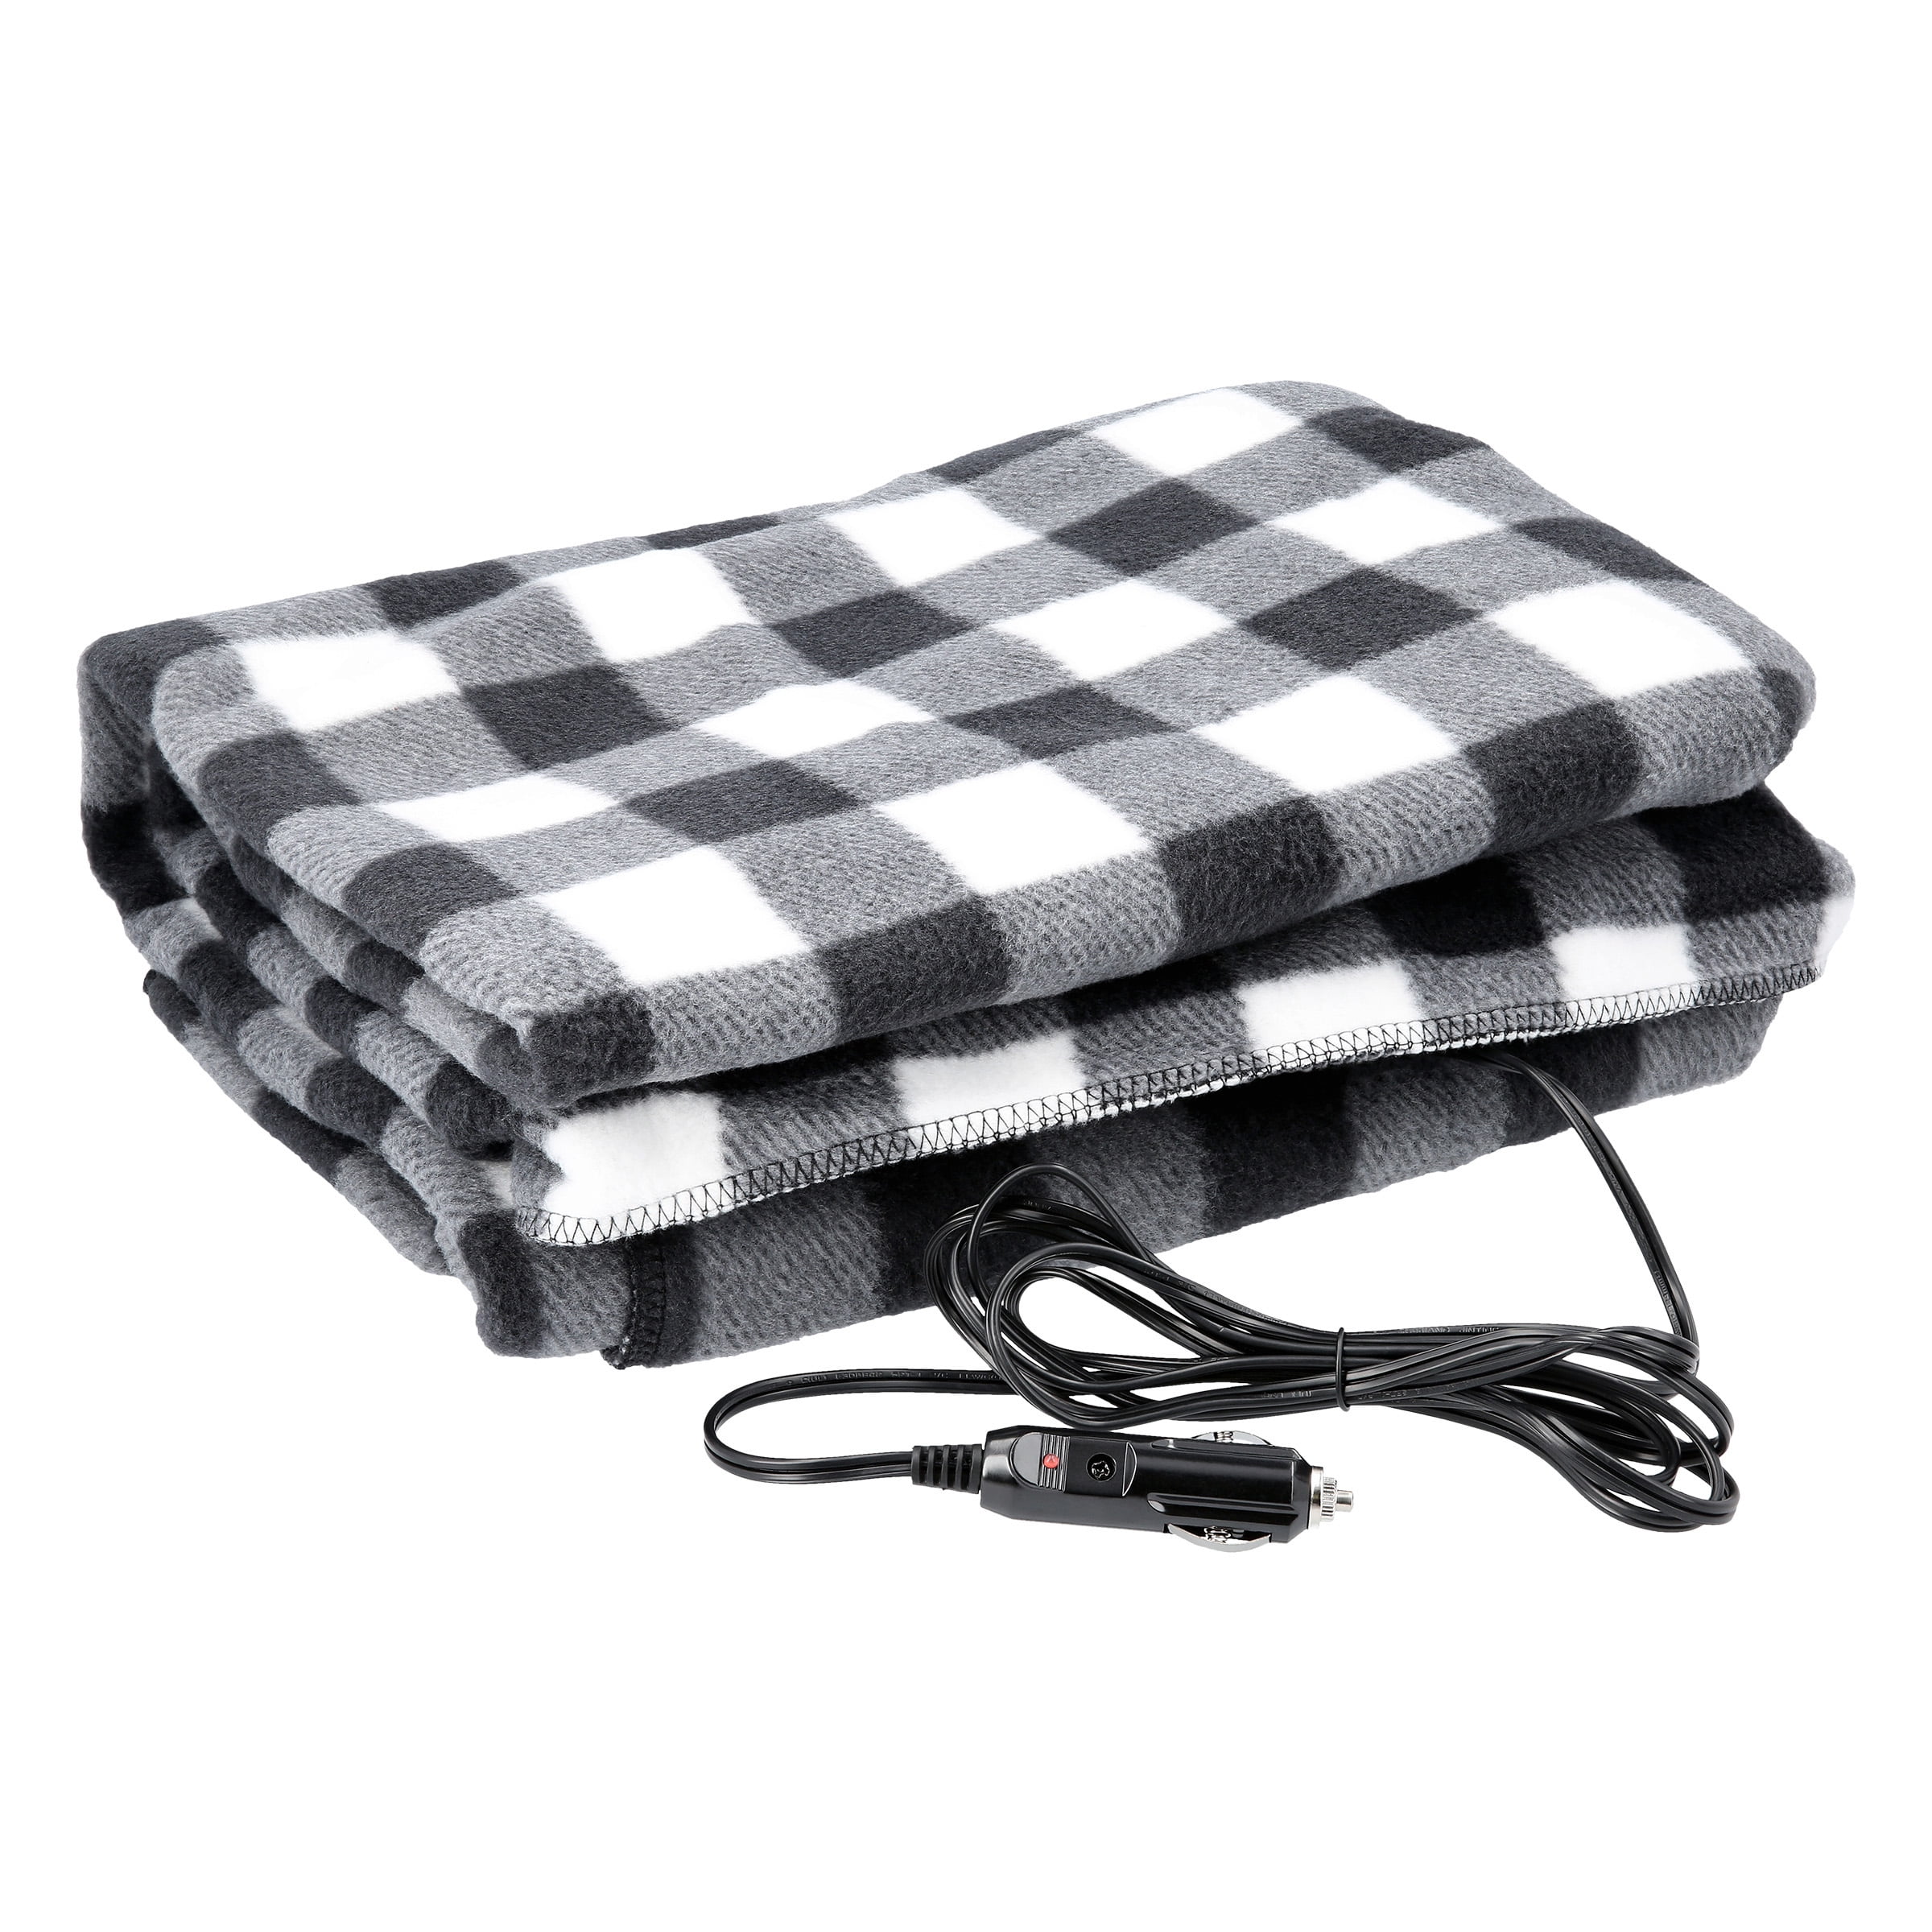 Heating Blanket Portable 12V Electric Heated Car Office Use Winter Warm Blanket 